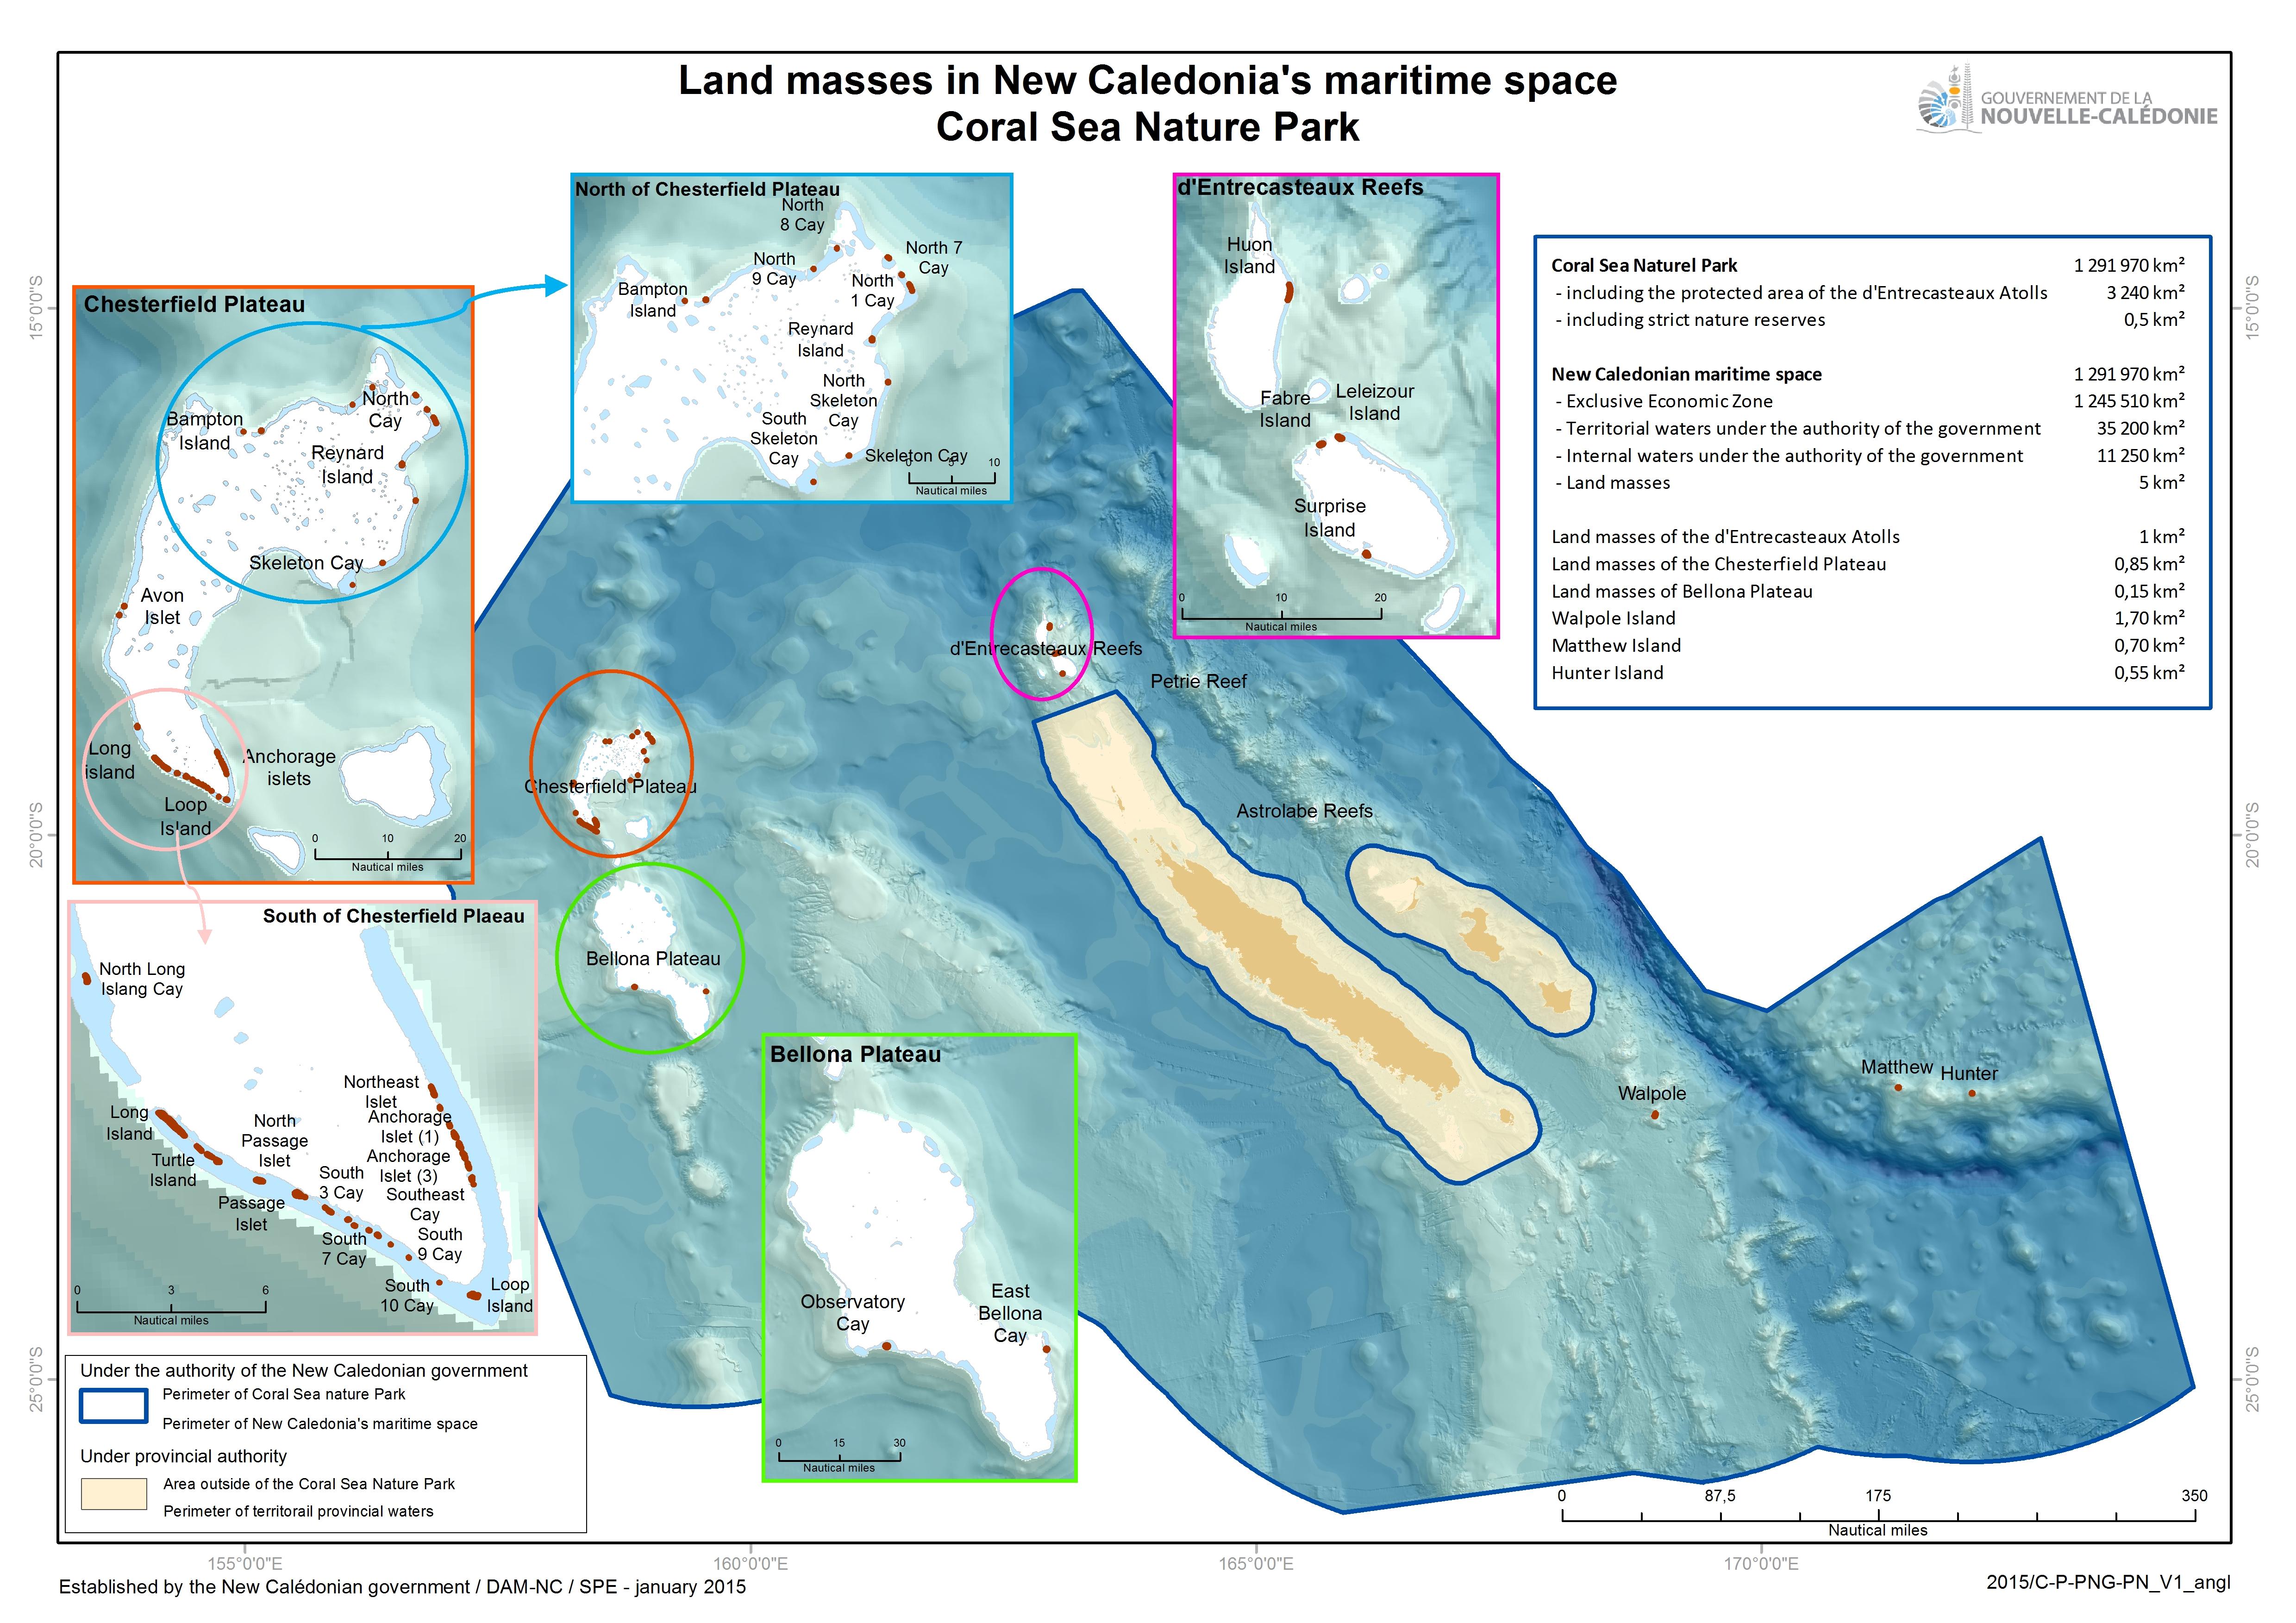 land_masses_in_coral_sea_nature_park.jpg